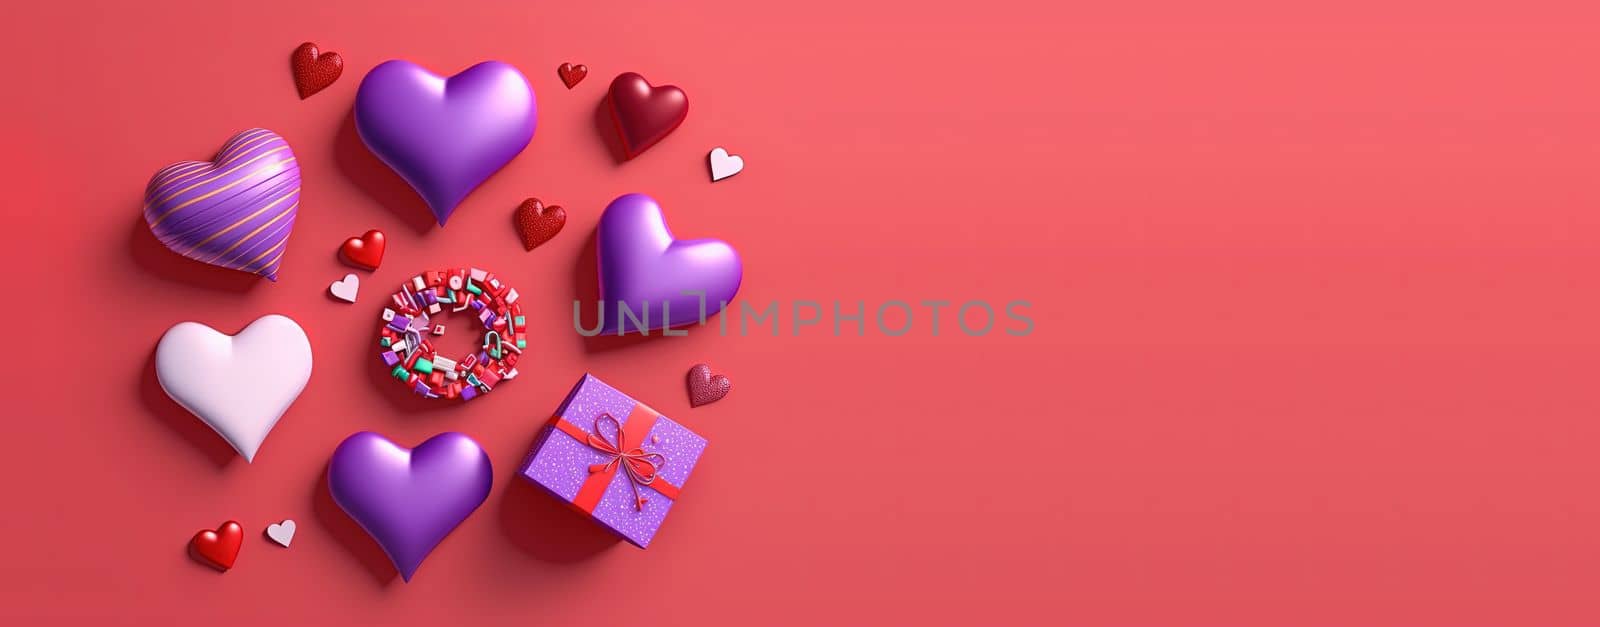 Shiny red heart on a festive Valentine's Day banner background by templator